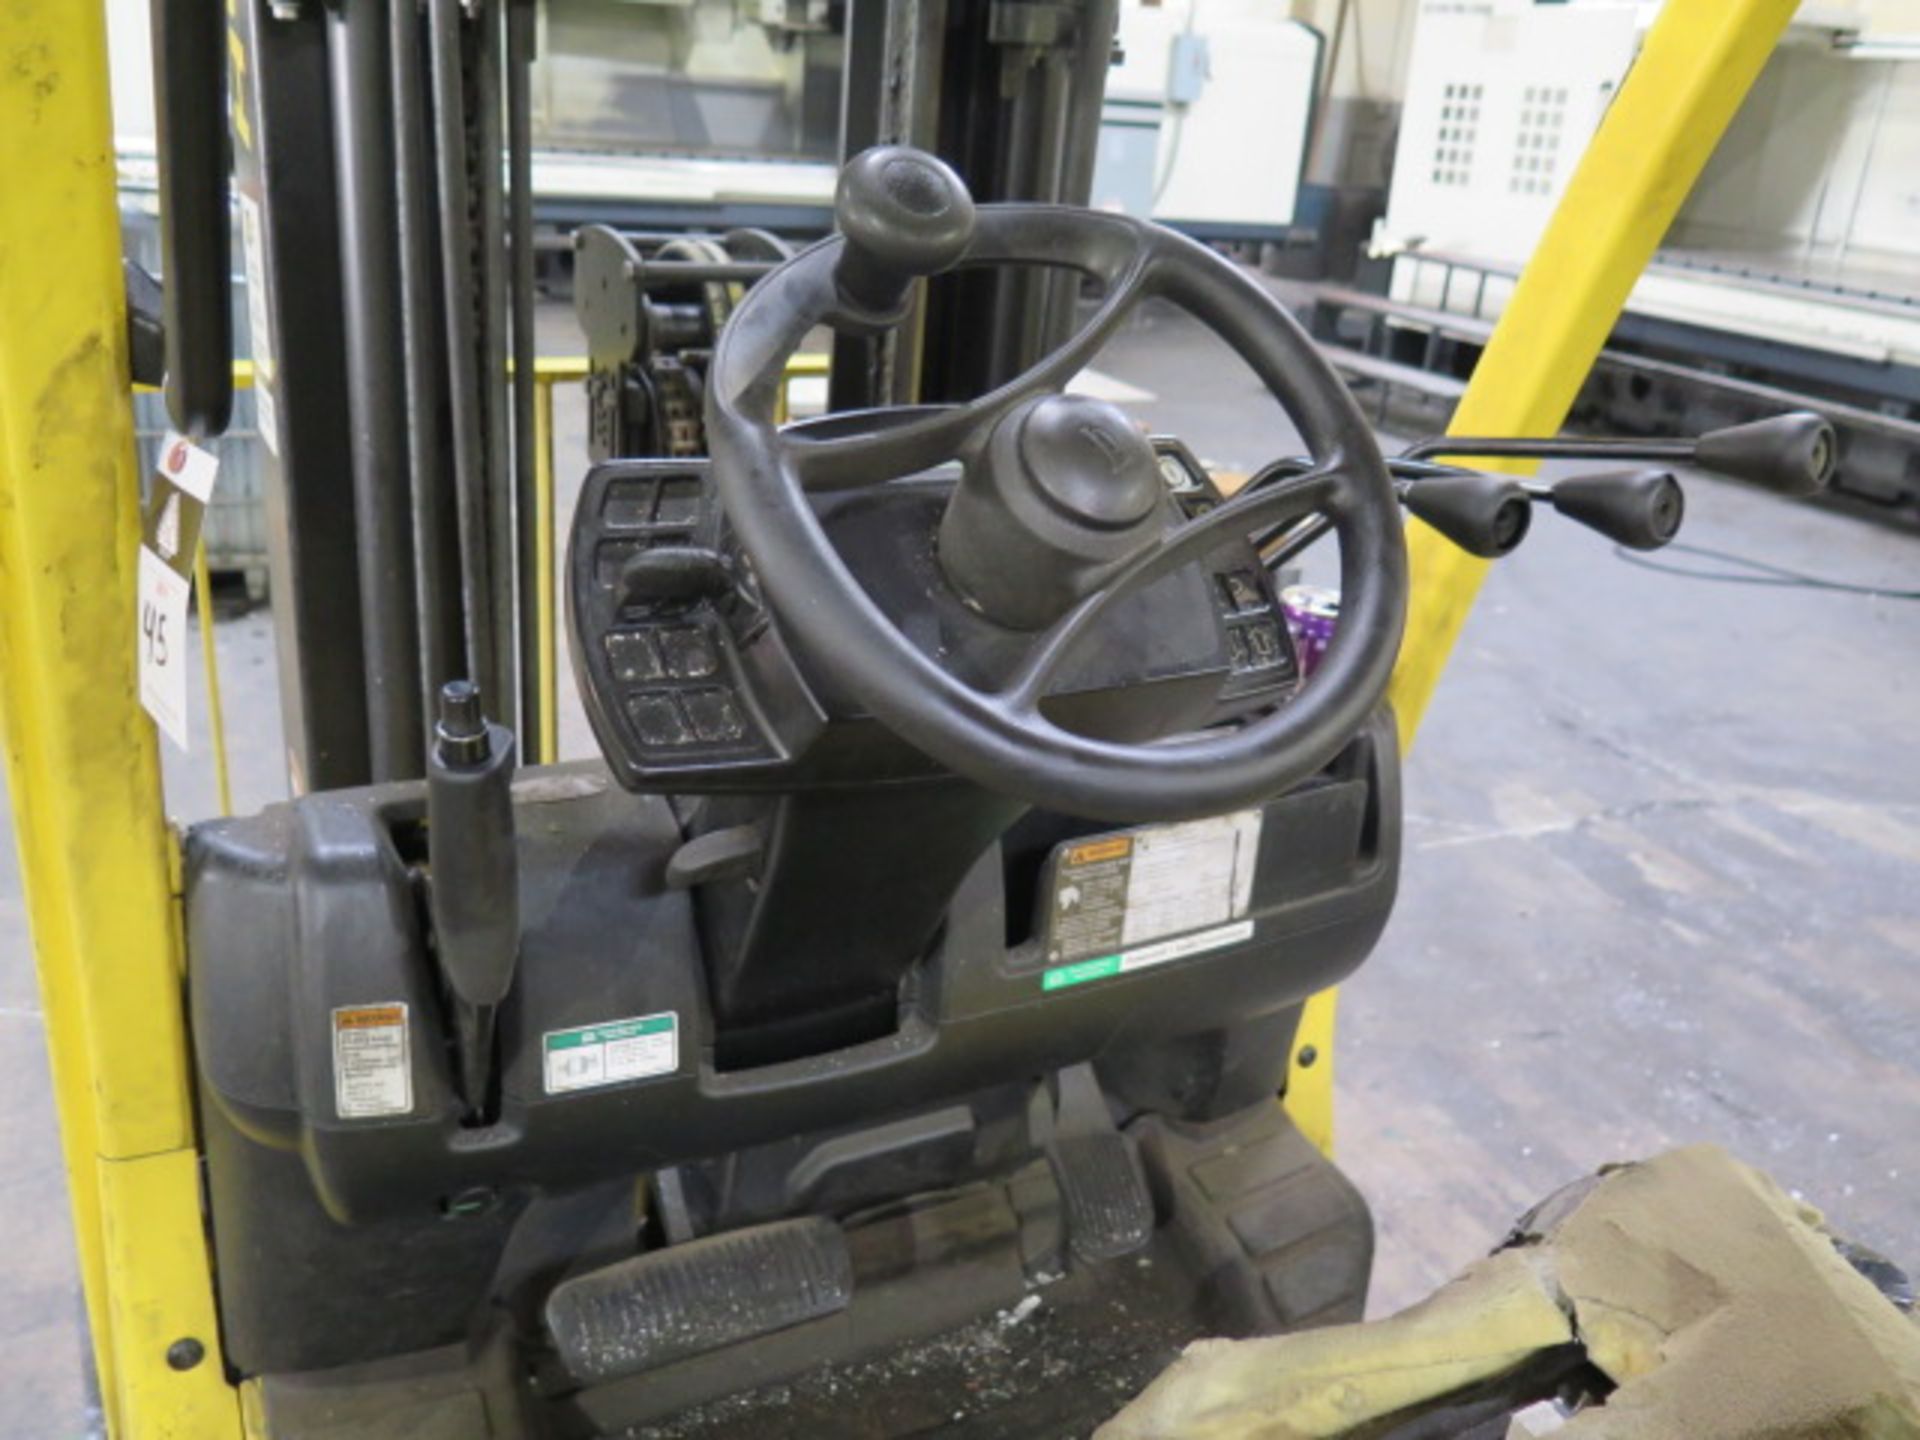 Hyster Fortis S50FT 5000 Lb Cap LPG Forklift s/n H187V07907R w/ Keyless Start, 3-Stage, SOLD AS IS - Image 12 of 15